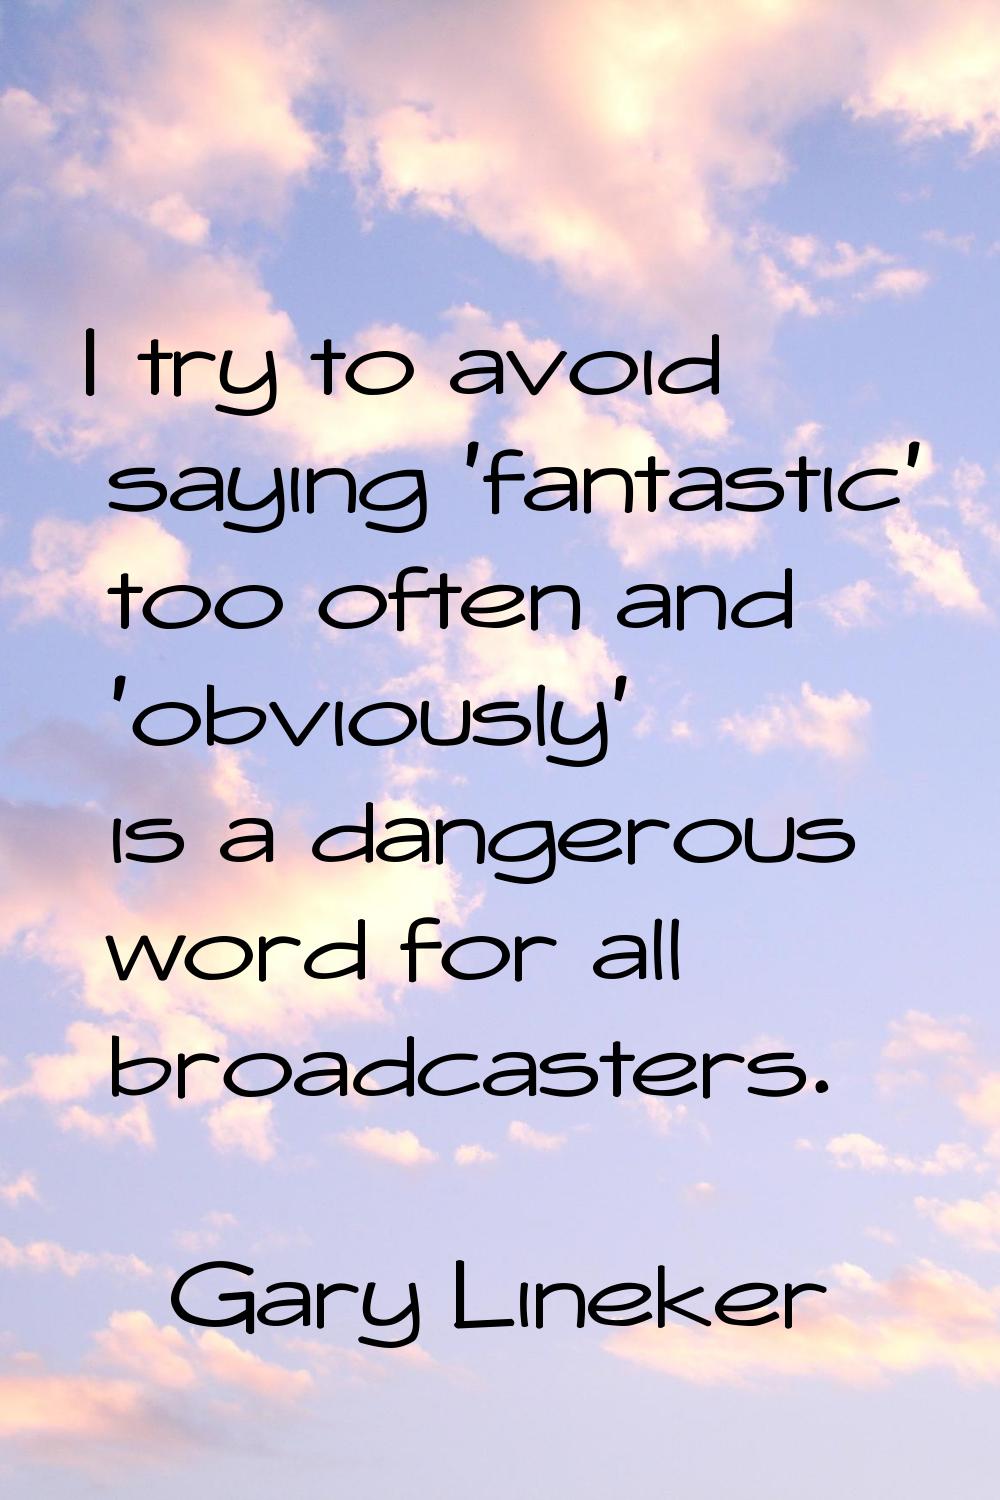 I try to avoid saying 'fantastic' too often and 'obviously' is a dangerous word for all broadcaster